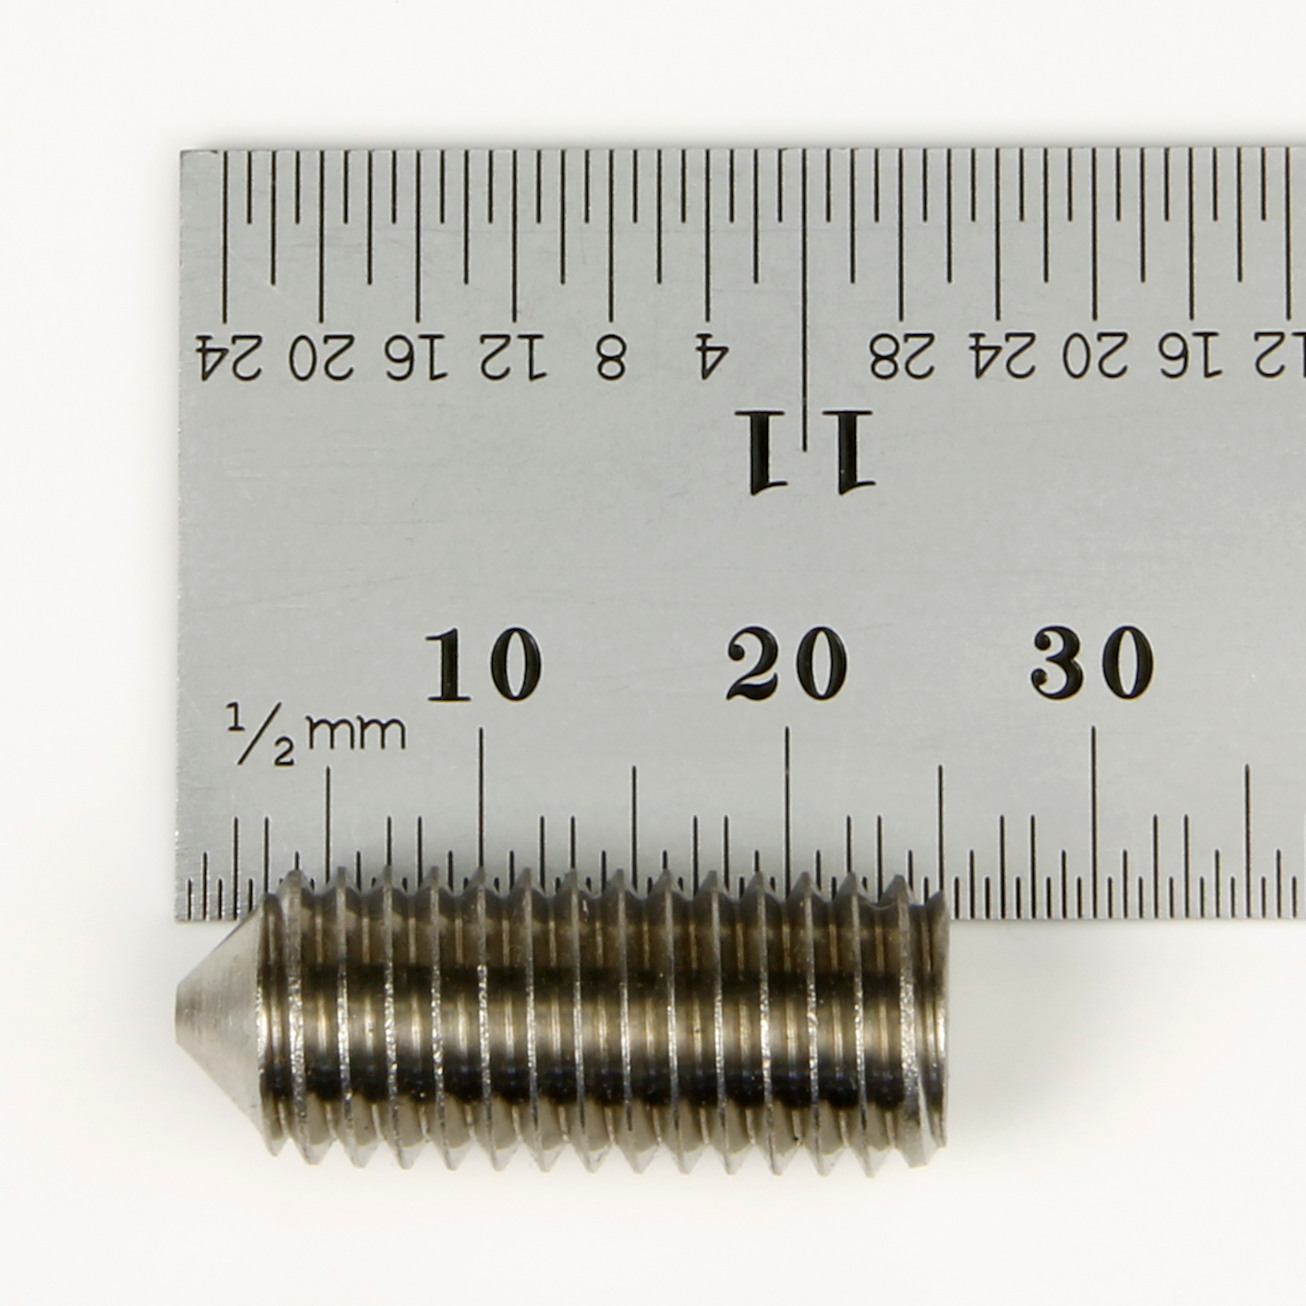 Grub screw length measured with a ruler